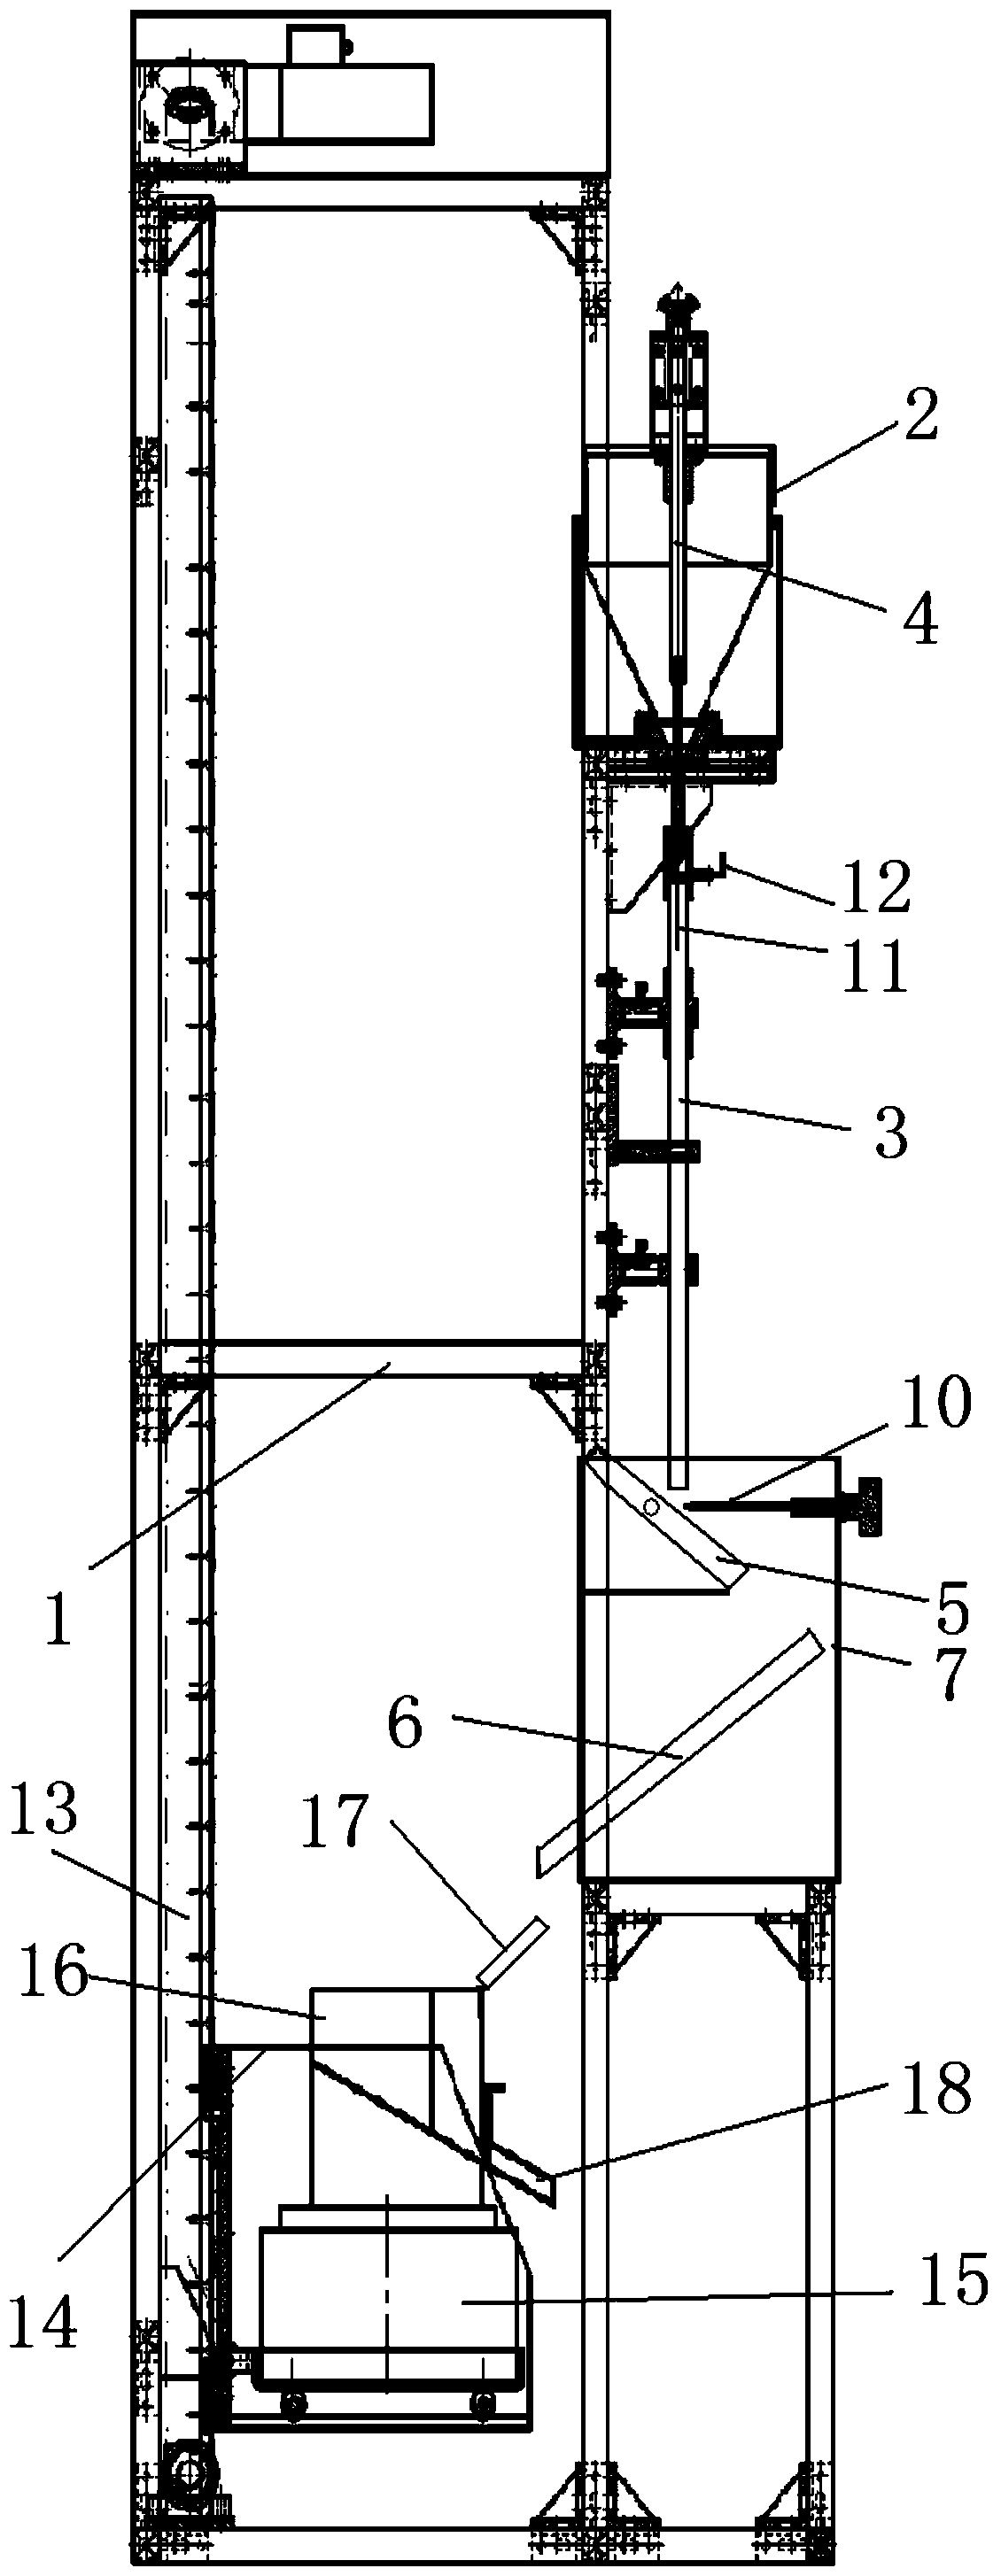 A device for detecting wear resistance of profile surface coating